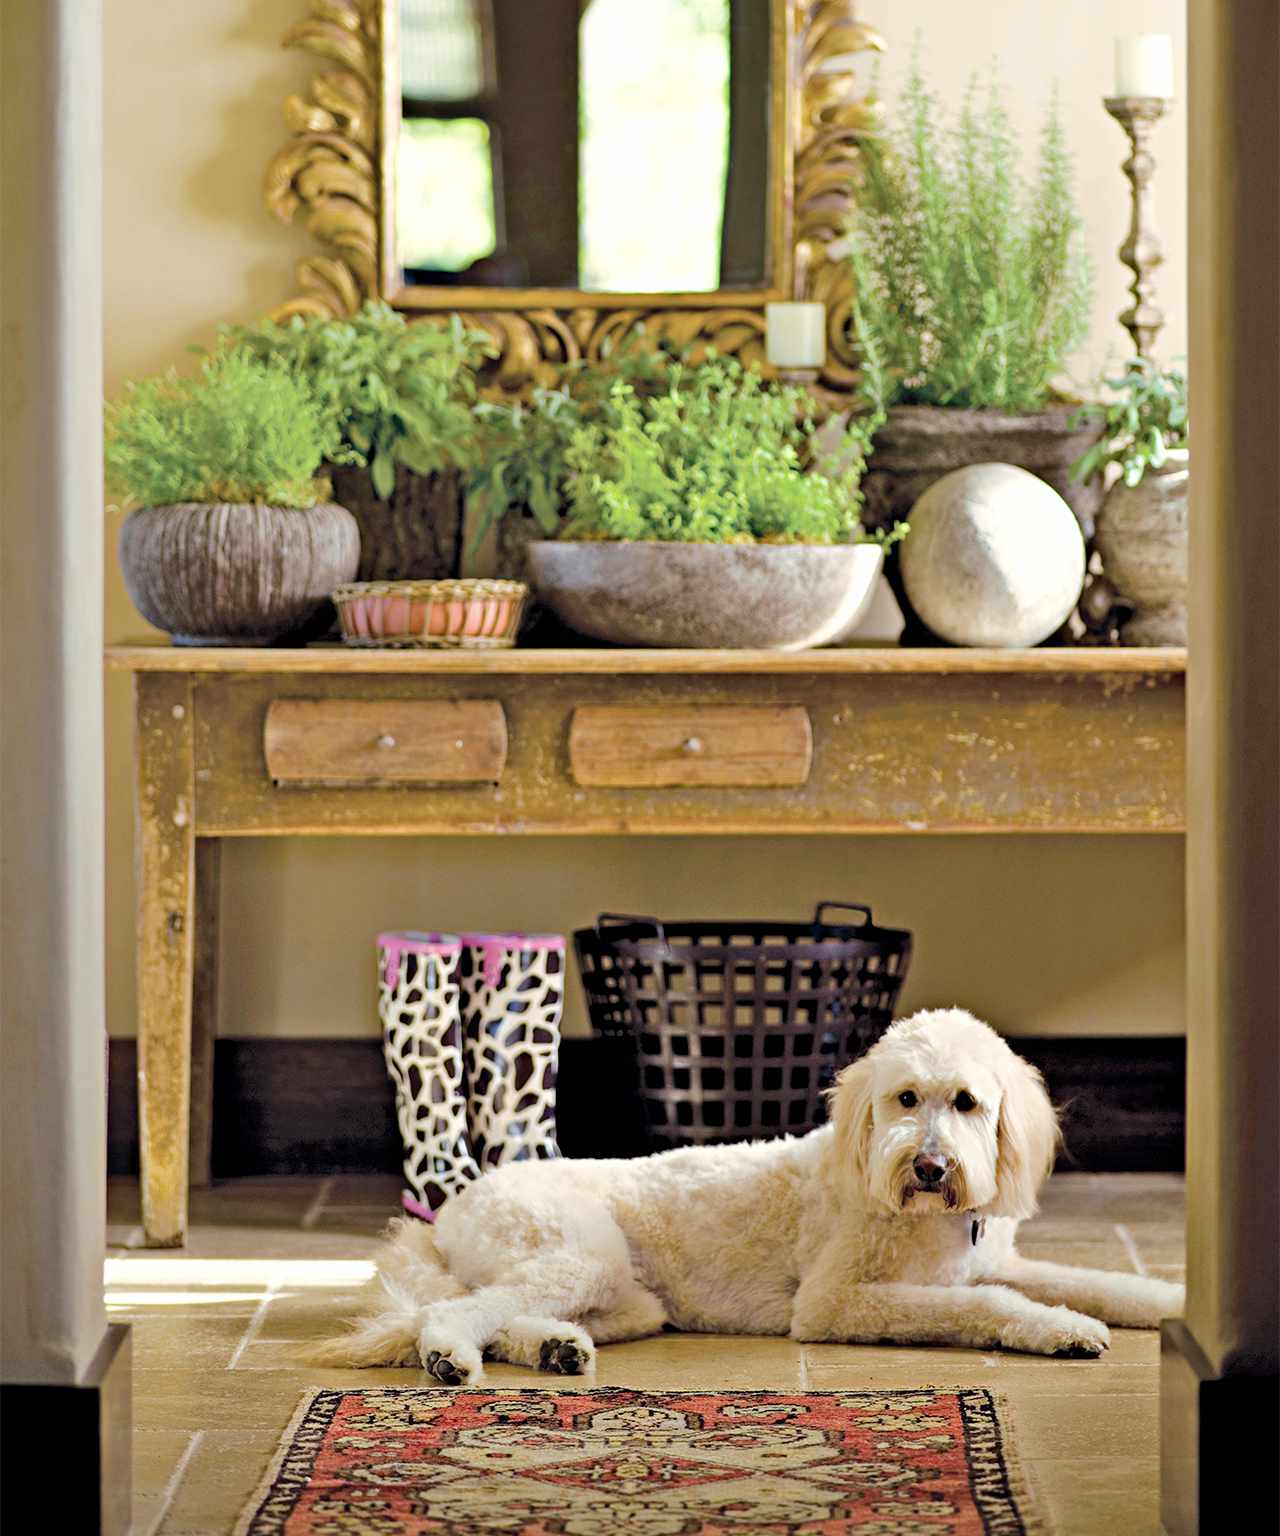 15 Pet Friendly Houseplants That Add Green Without The Worry